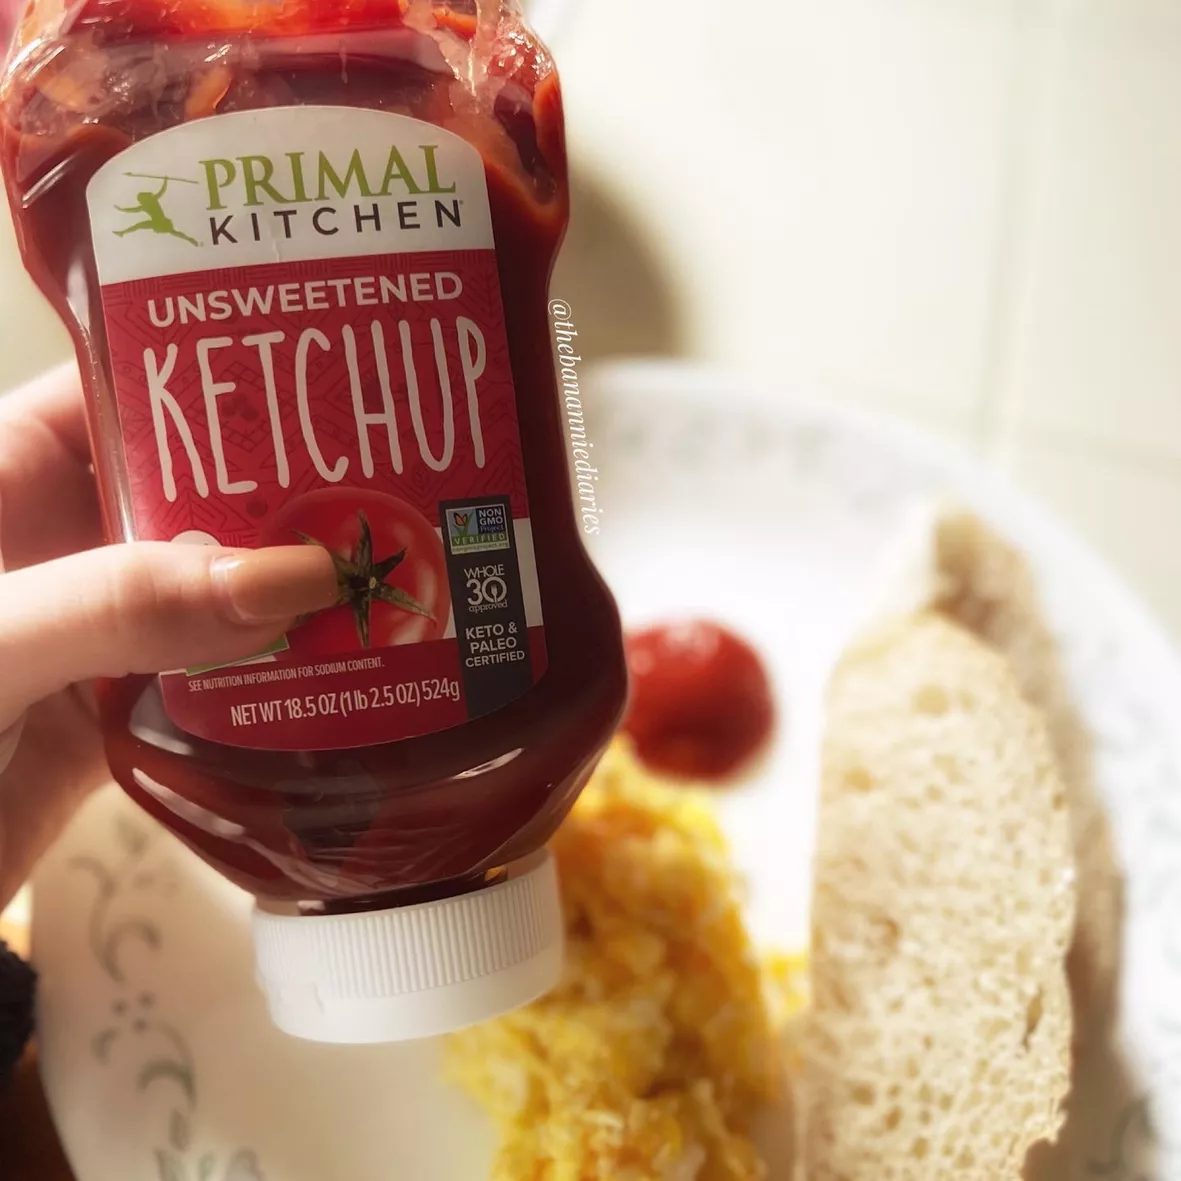 Primal Kitchen Organic Unsweetened Ketchup, Whole 30 Approved